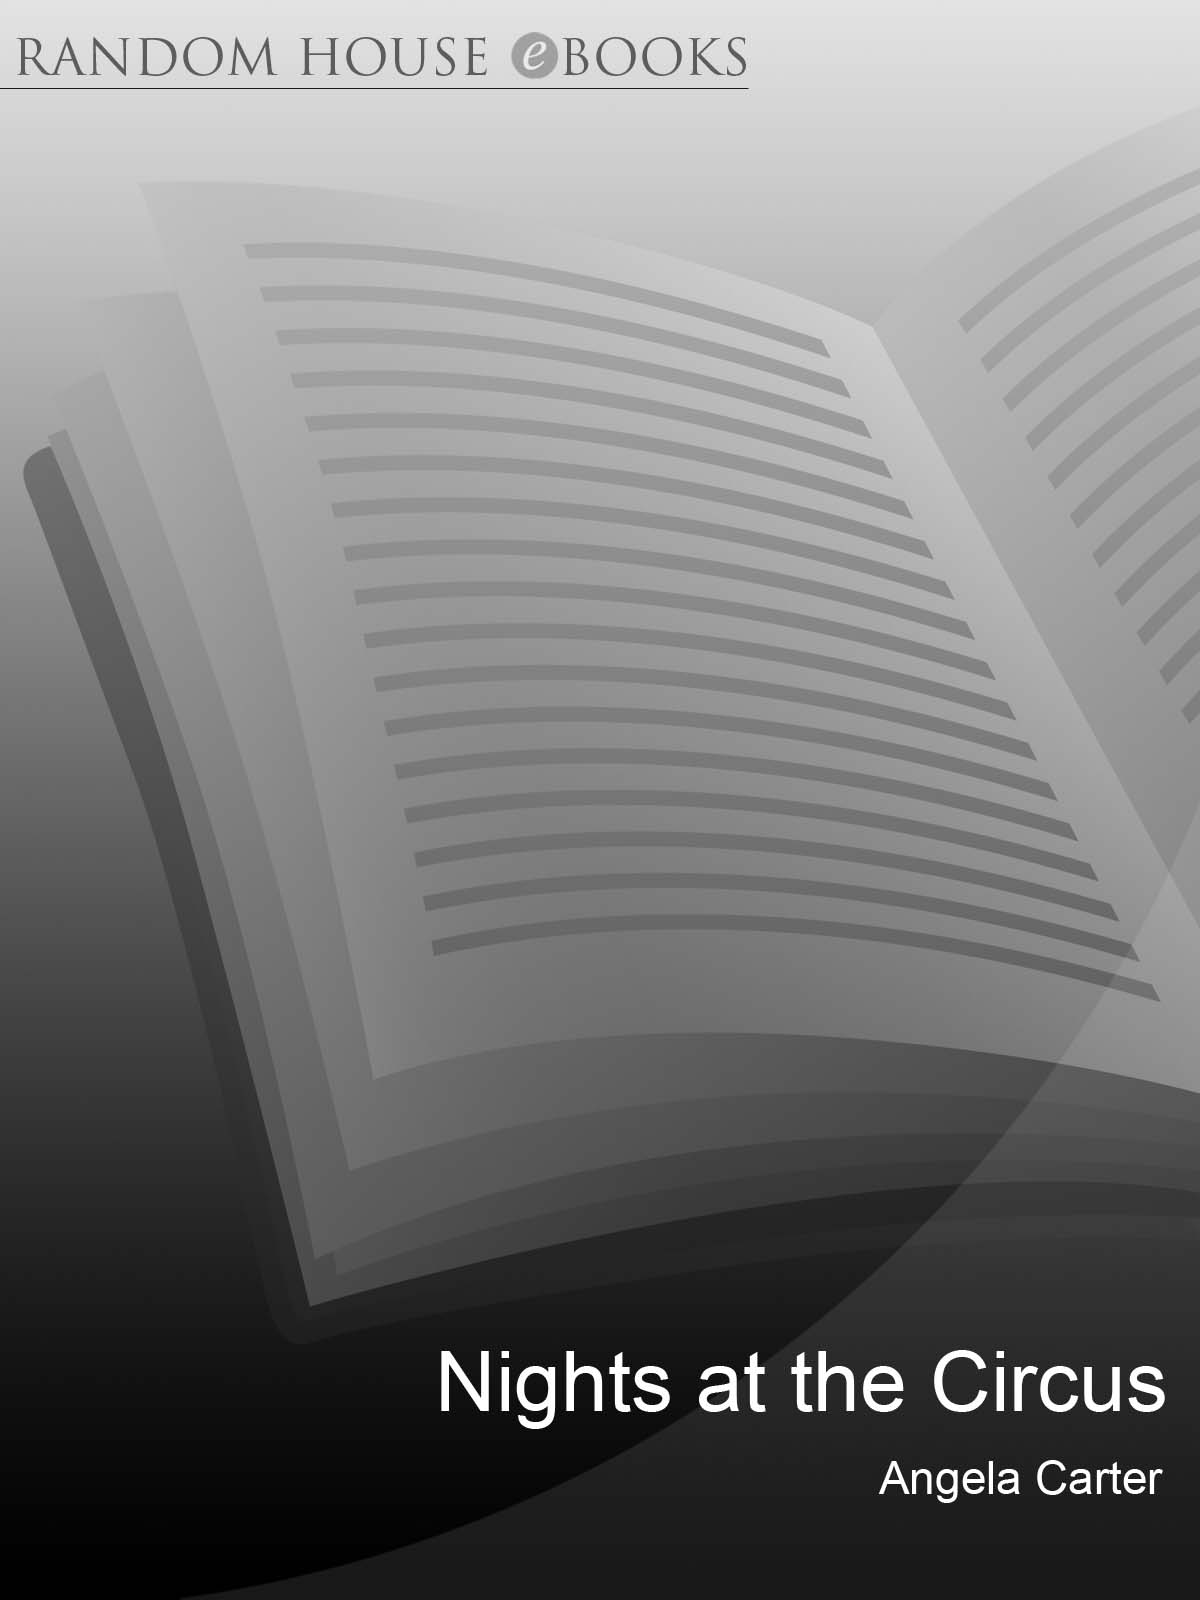 Nights at the Circus (2003) by Angela Carter